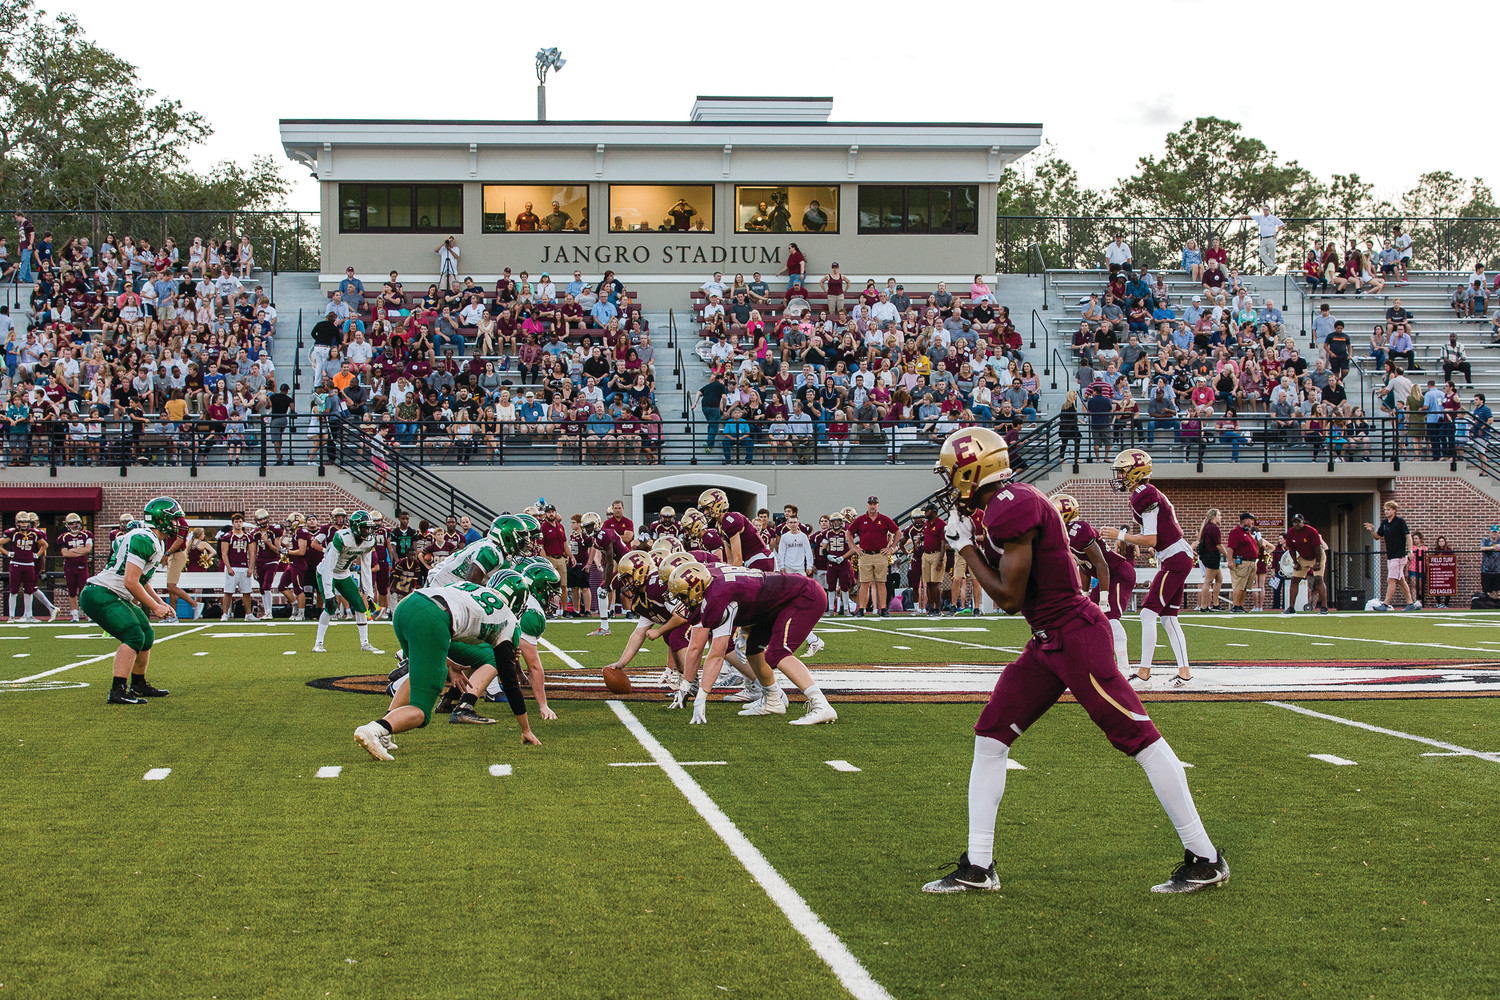 Episcopal takes on Eagle’s View in its home opener on Sept. 22 at the newly renovated Jangro Stadium, which was dedicated to the Ponte Vedra Beach family during halftime of the game.